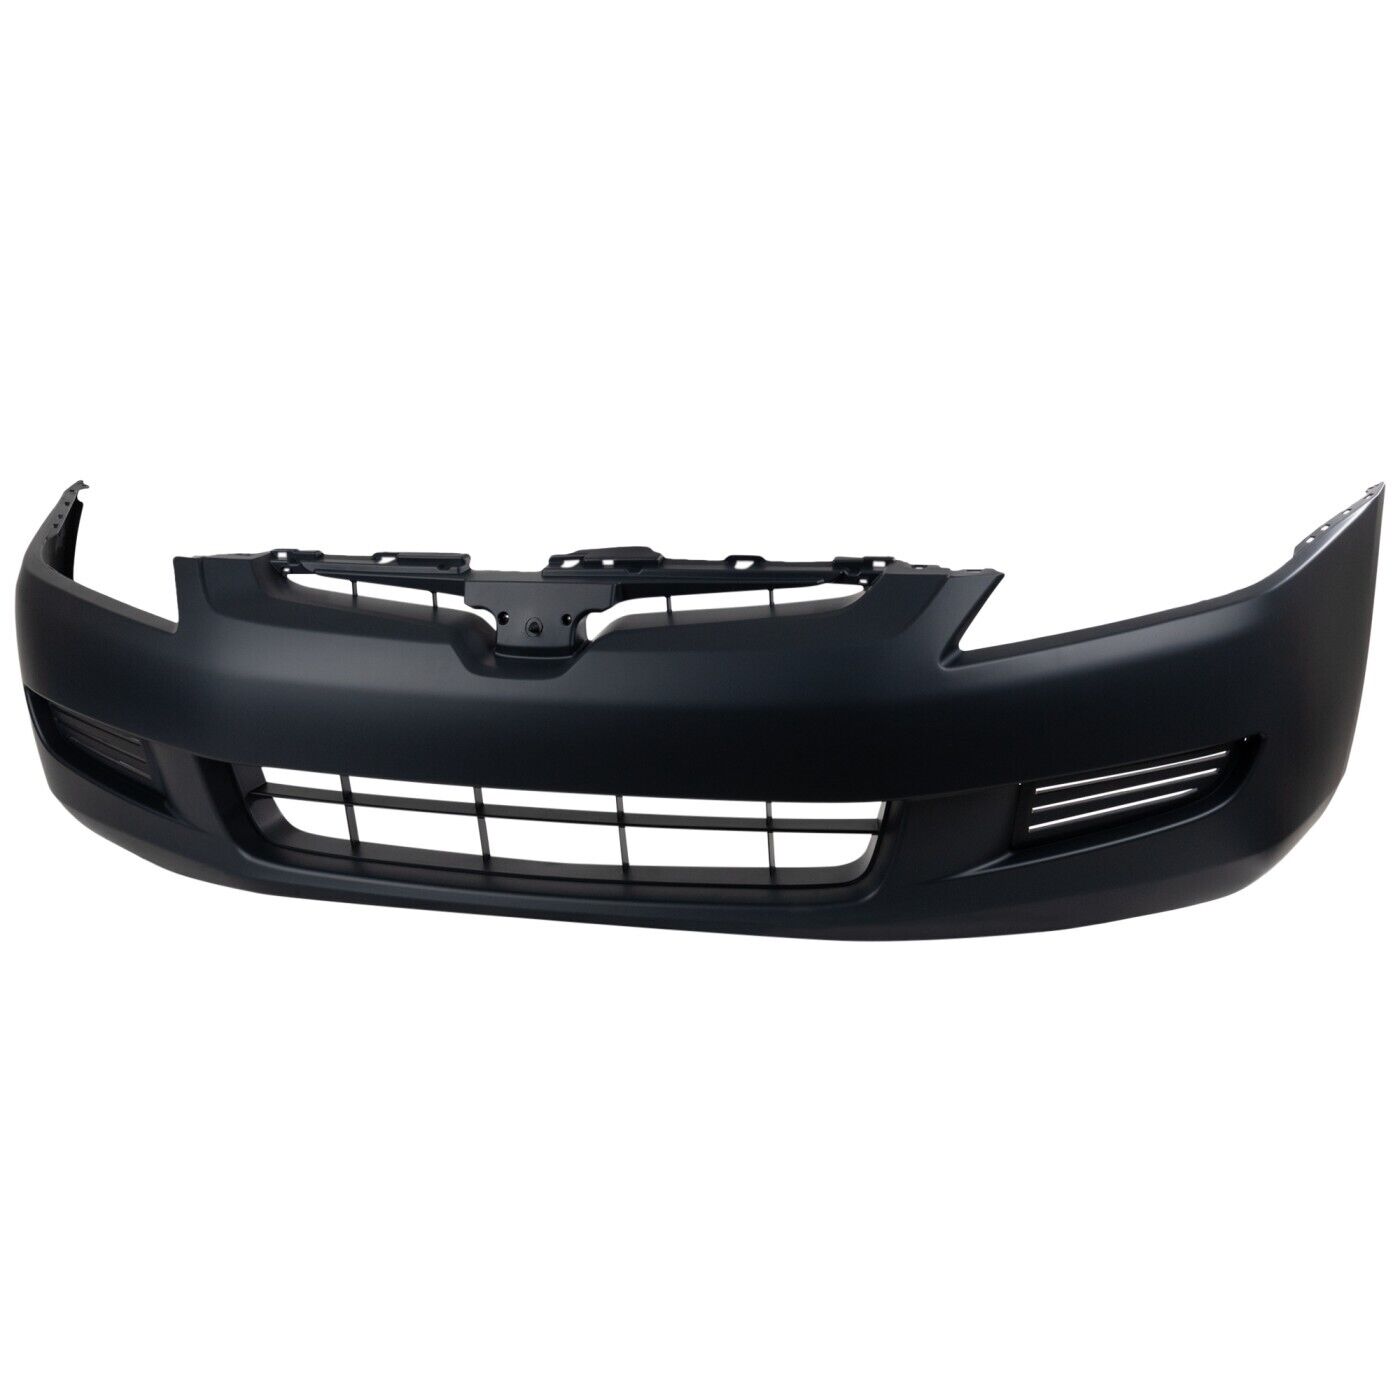 Front Bumper Cover For 2003-2005 Honda Accord Coupe Primed With Emblem Provision